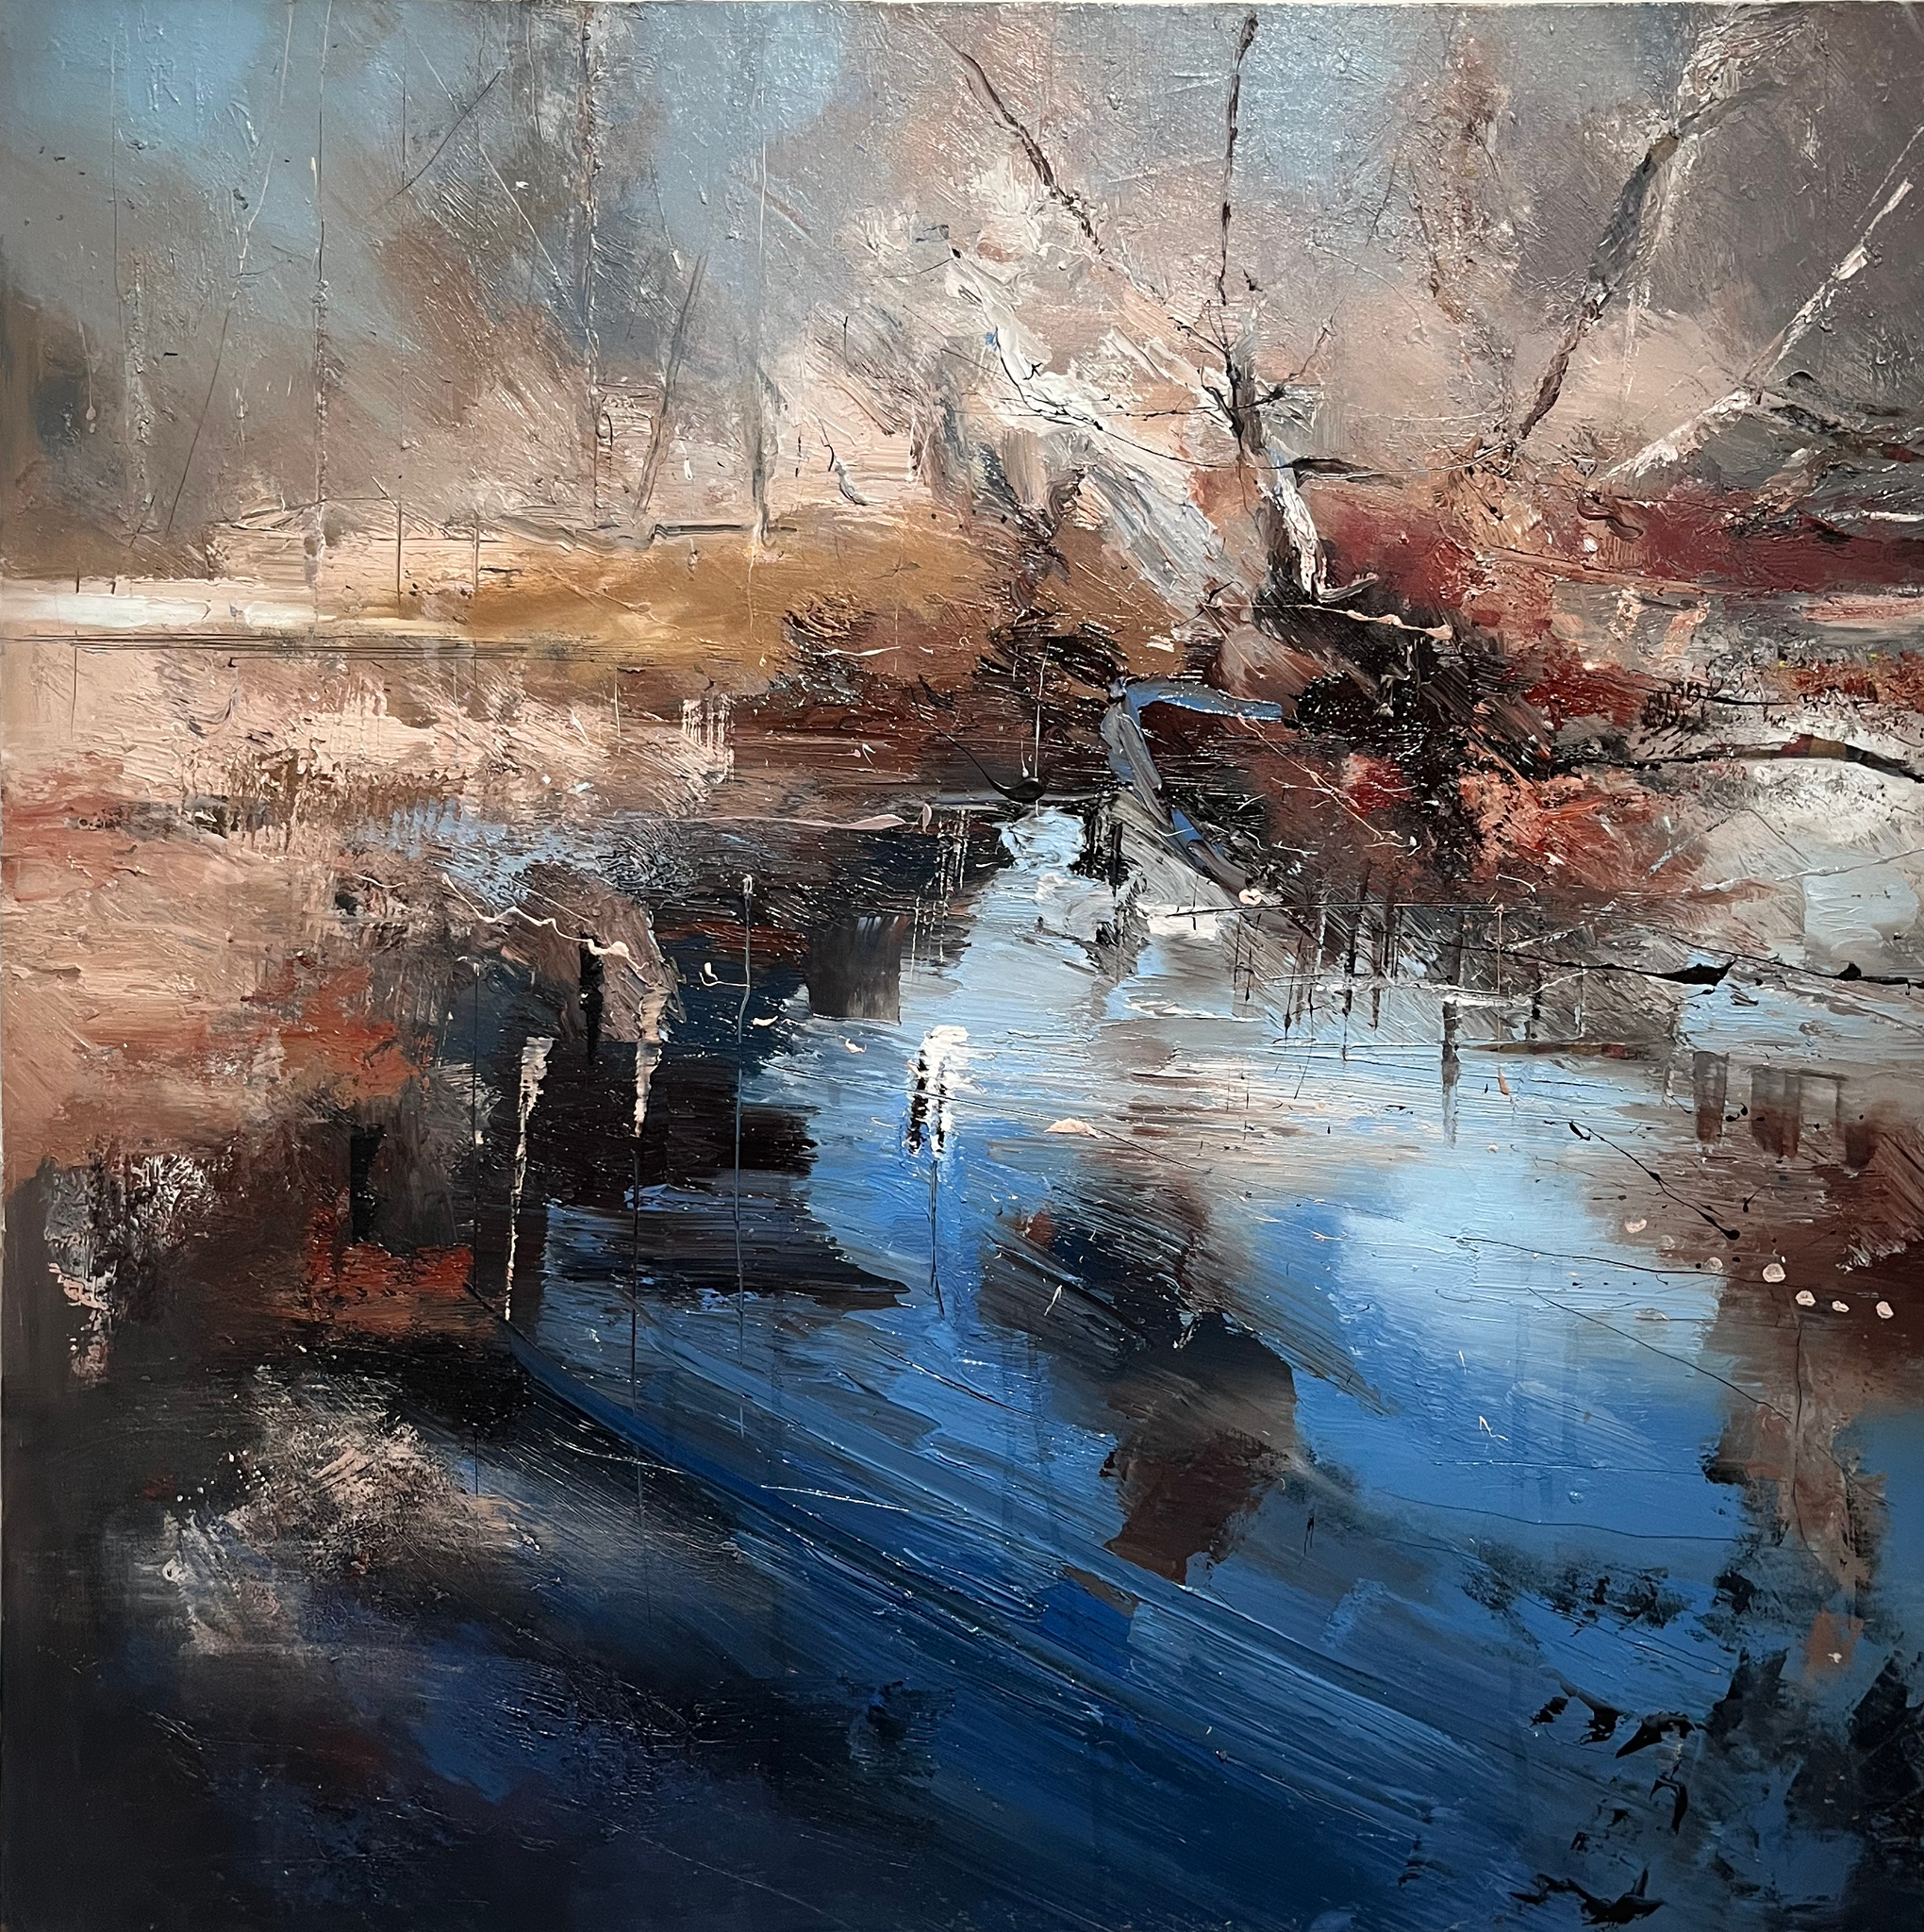 Claire Wiltsher's 'Enclosure', part of the 'Bound in Time' collection.